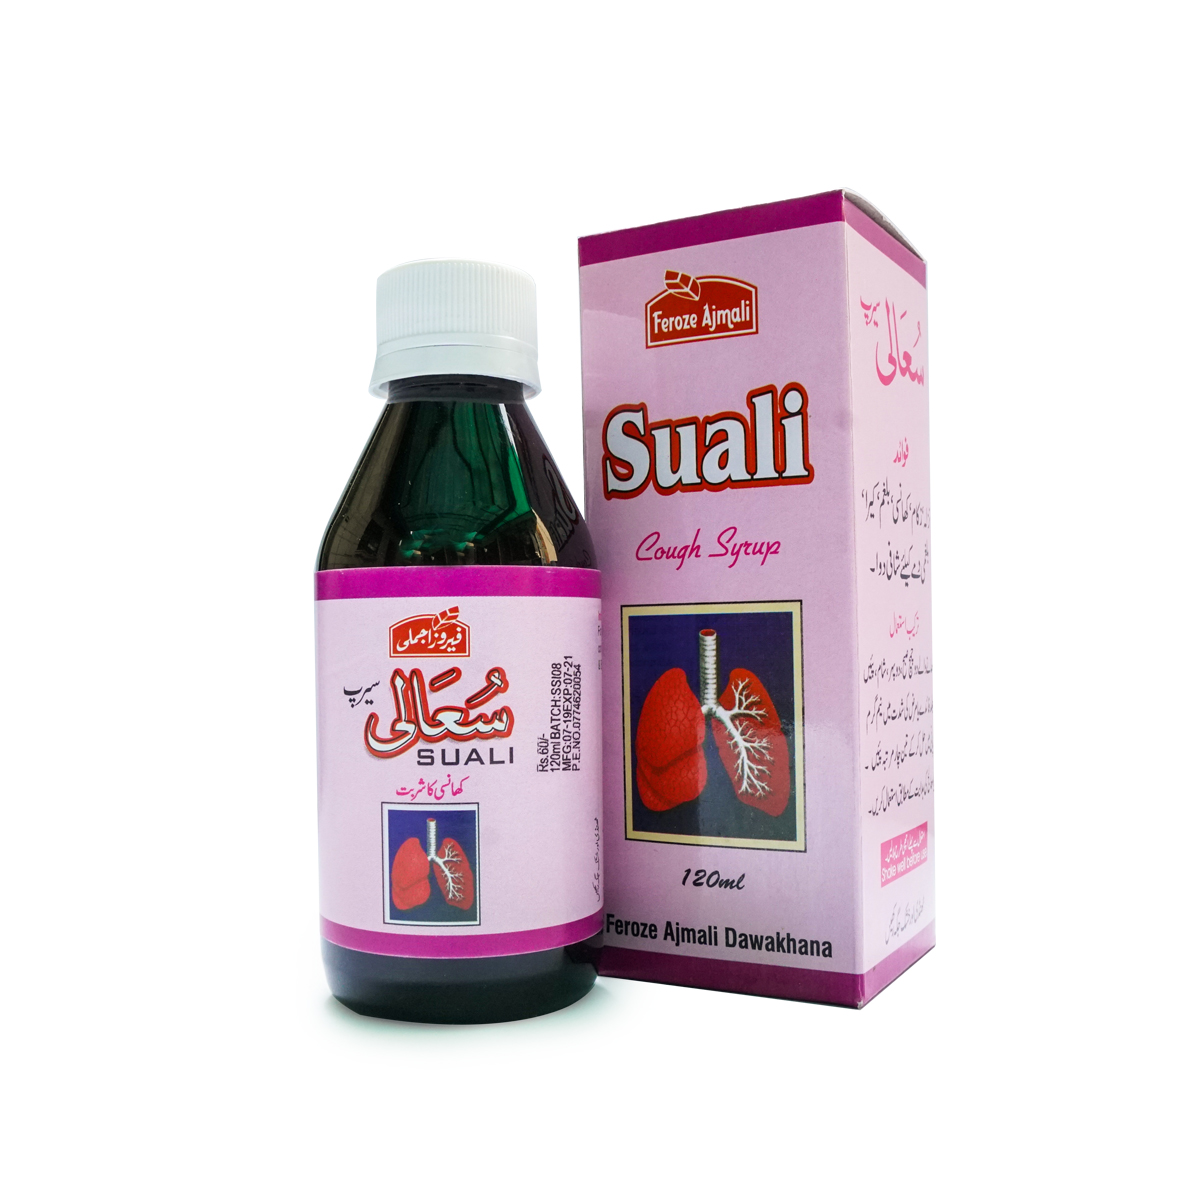 Suali Cough Syrup